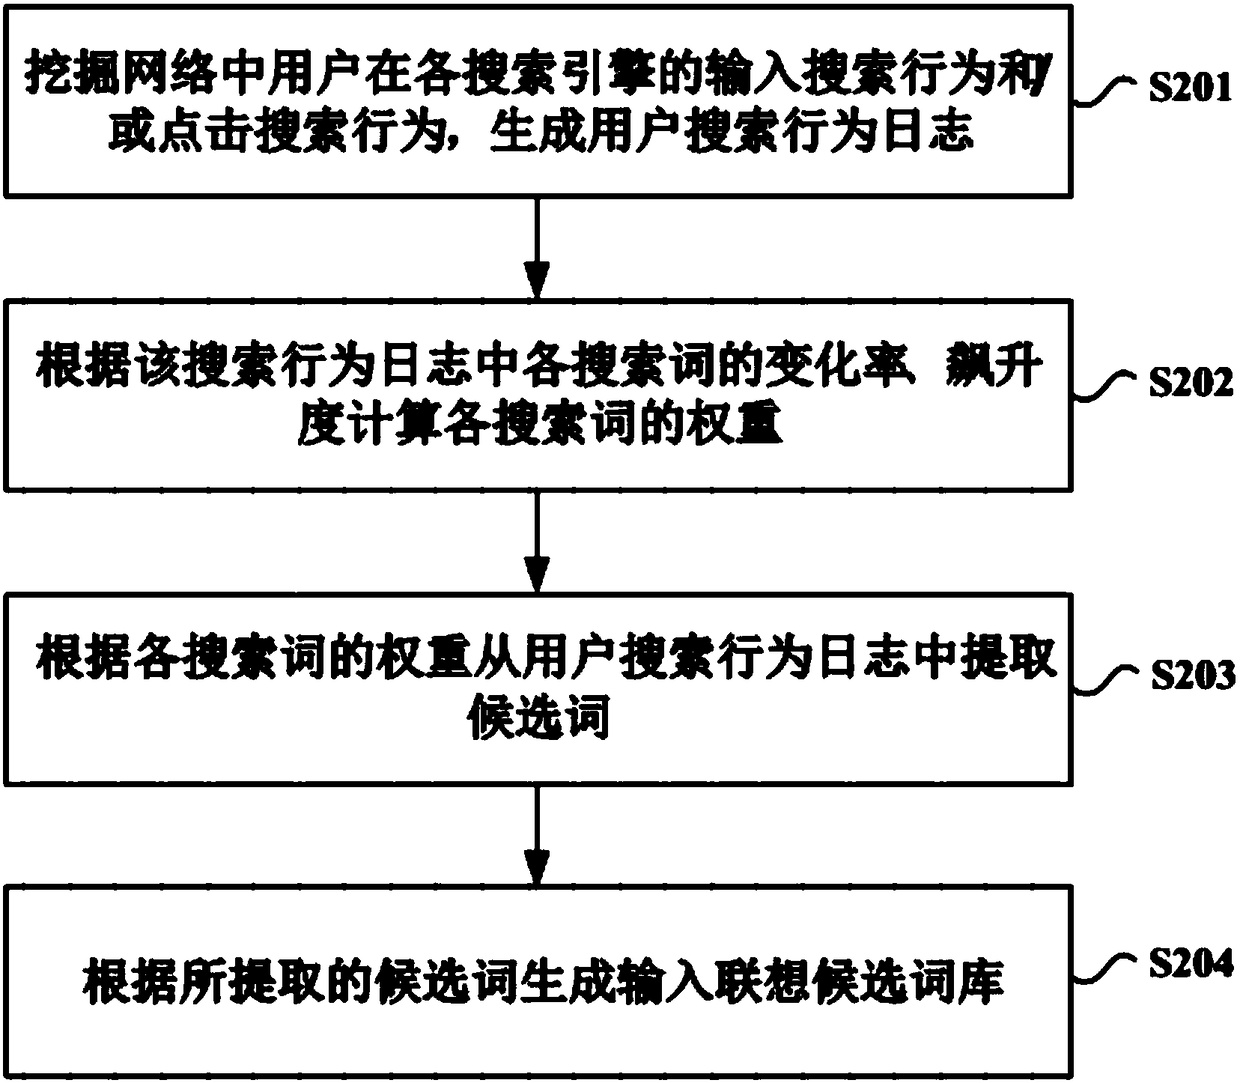 Input association recommendation method and apparatus for optimizing commercial word promotion